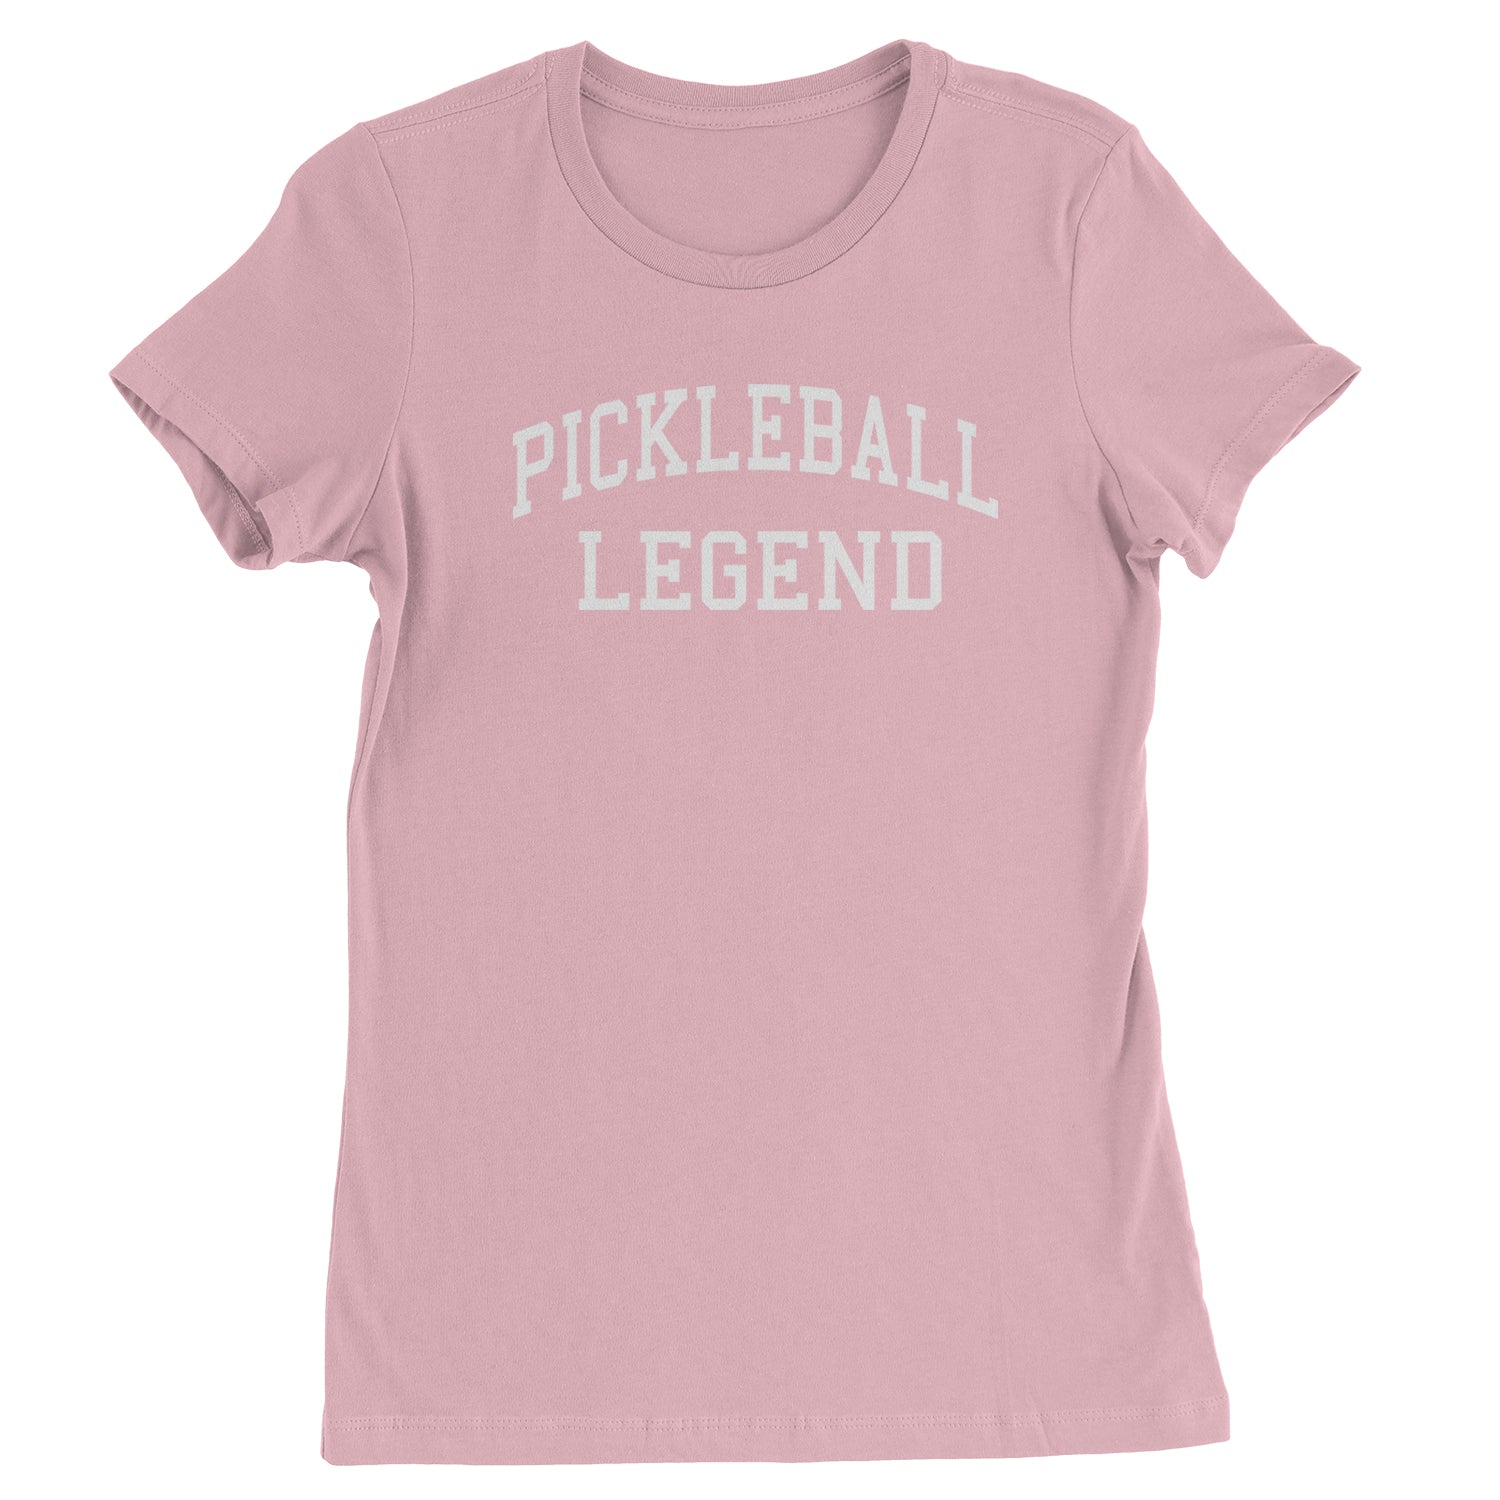 Pickleball Legend Womens T-shirt ball, dink, dinking, pickle, pickleball by Expression Tees